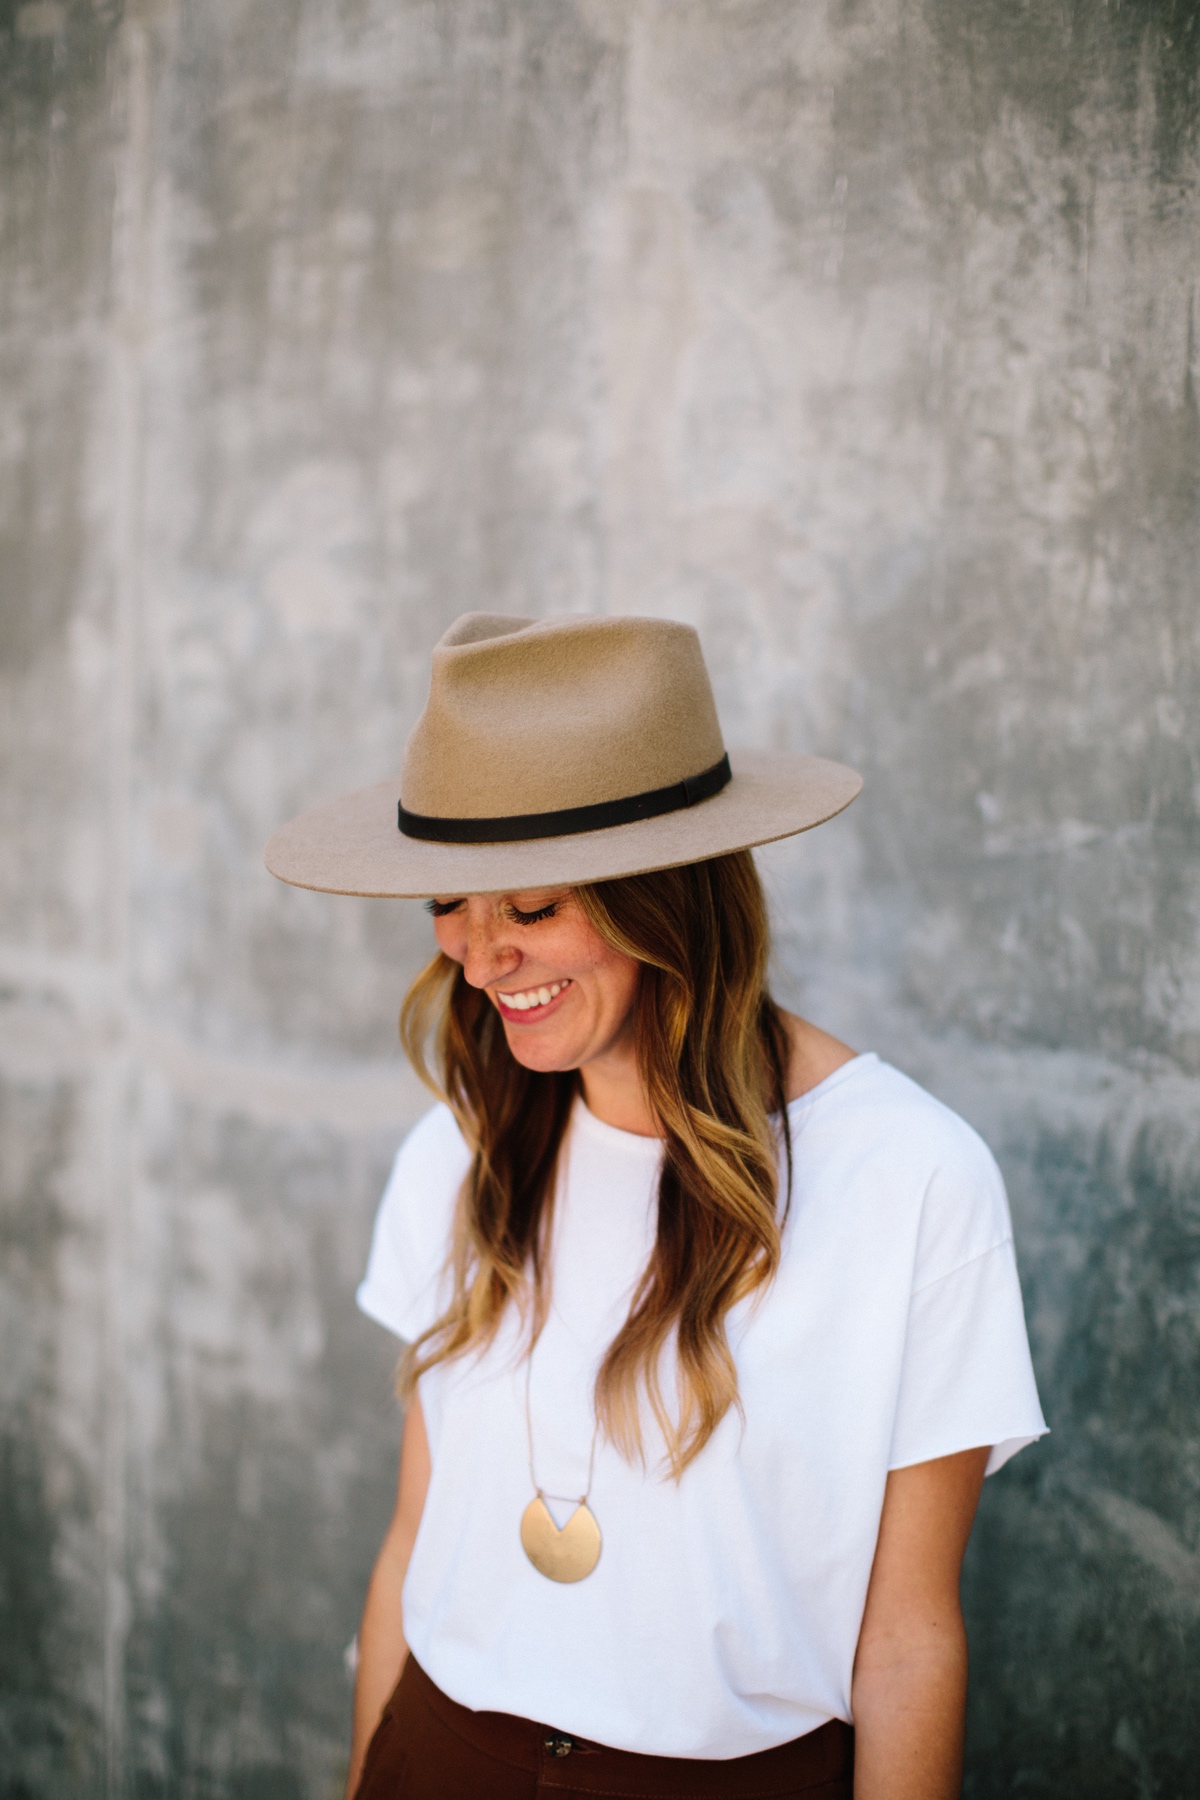 WEARING ALL THE HATS: OUR INTERVIEW WITH LAUREN LILLY, FOUNDER OF YELLOW 108 - THE YELLOW ROOM